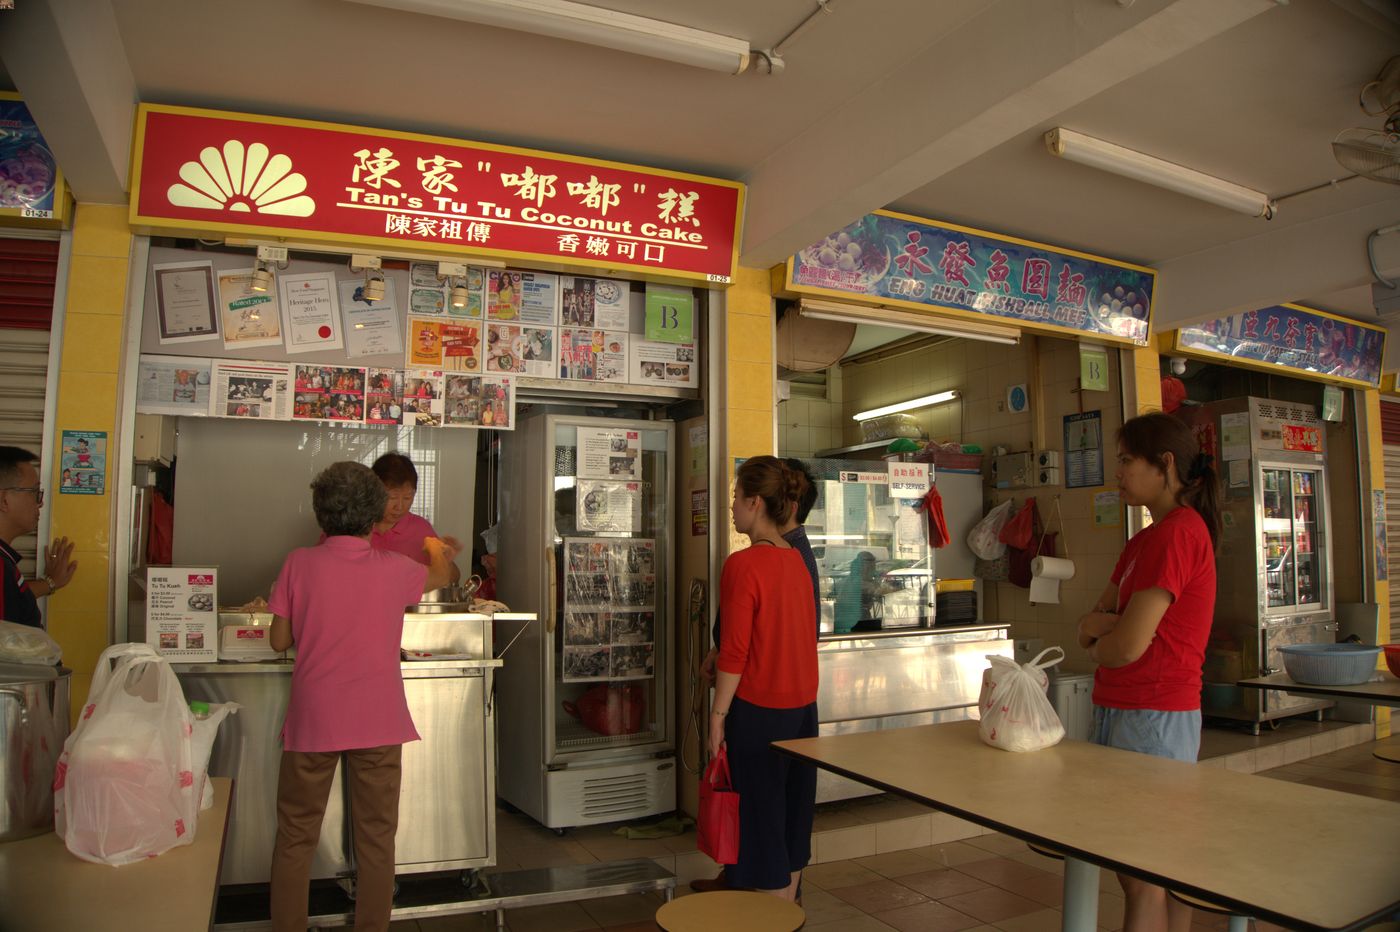 Queues at Tan’s Tutu Coconut Cake, which is run by Ms Tan Bee Hua, the daughter of Mr Tan Eng Huat–the creator of kueh tutu.